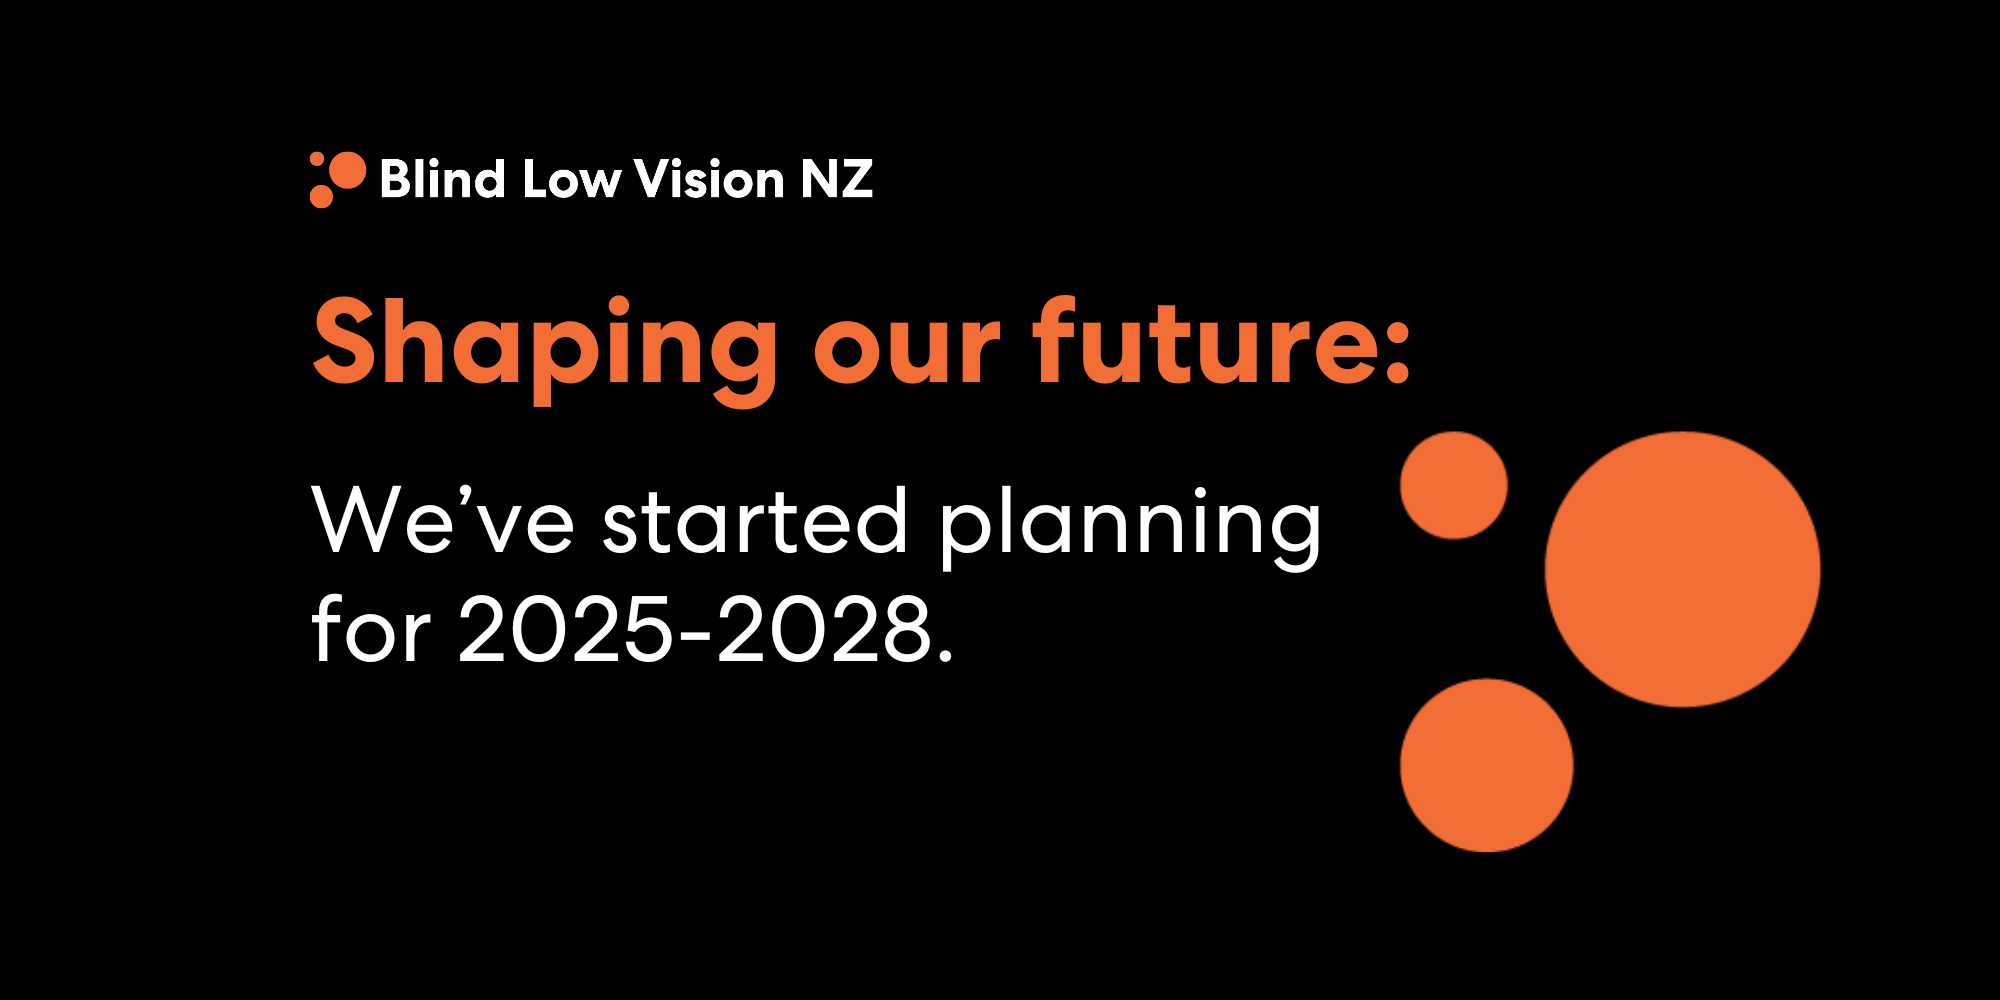 The Blind Low Vision NZ logo above the text Shaping Our Future: We've started planning for 2025-2028.